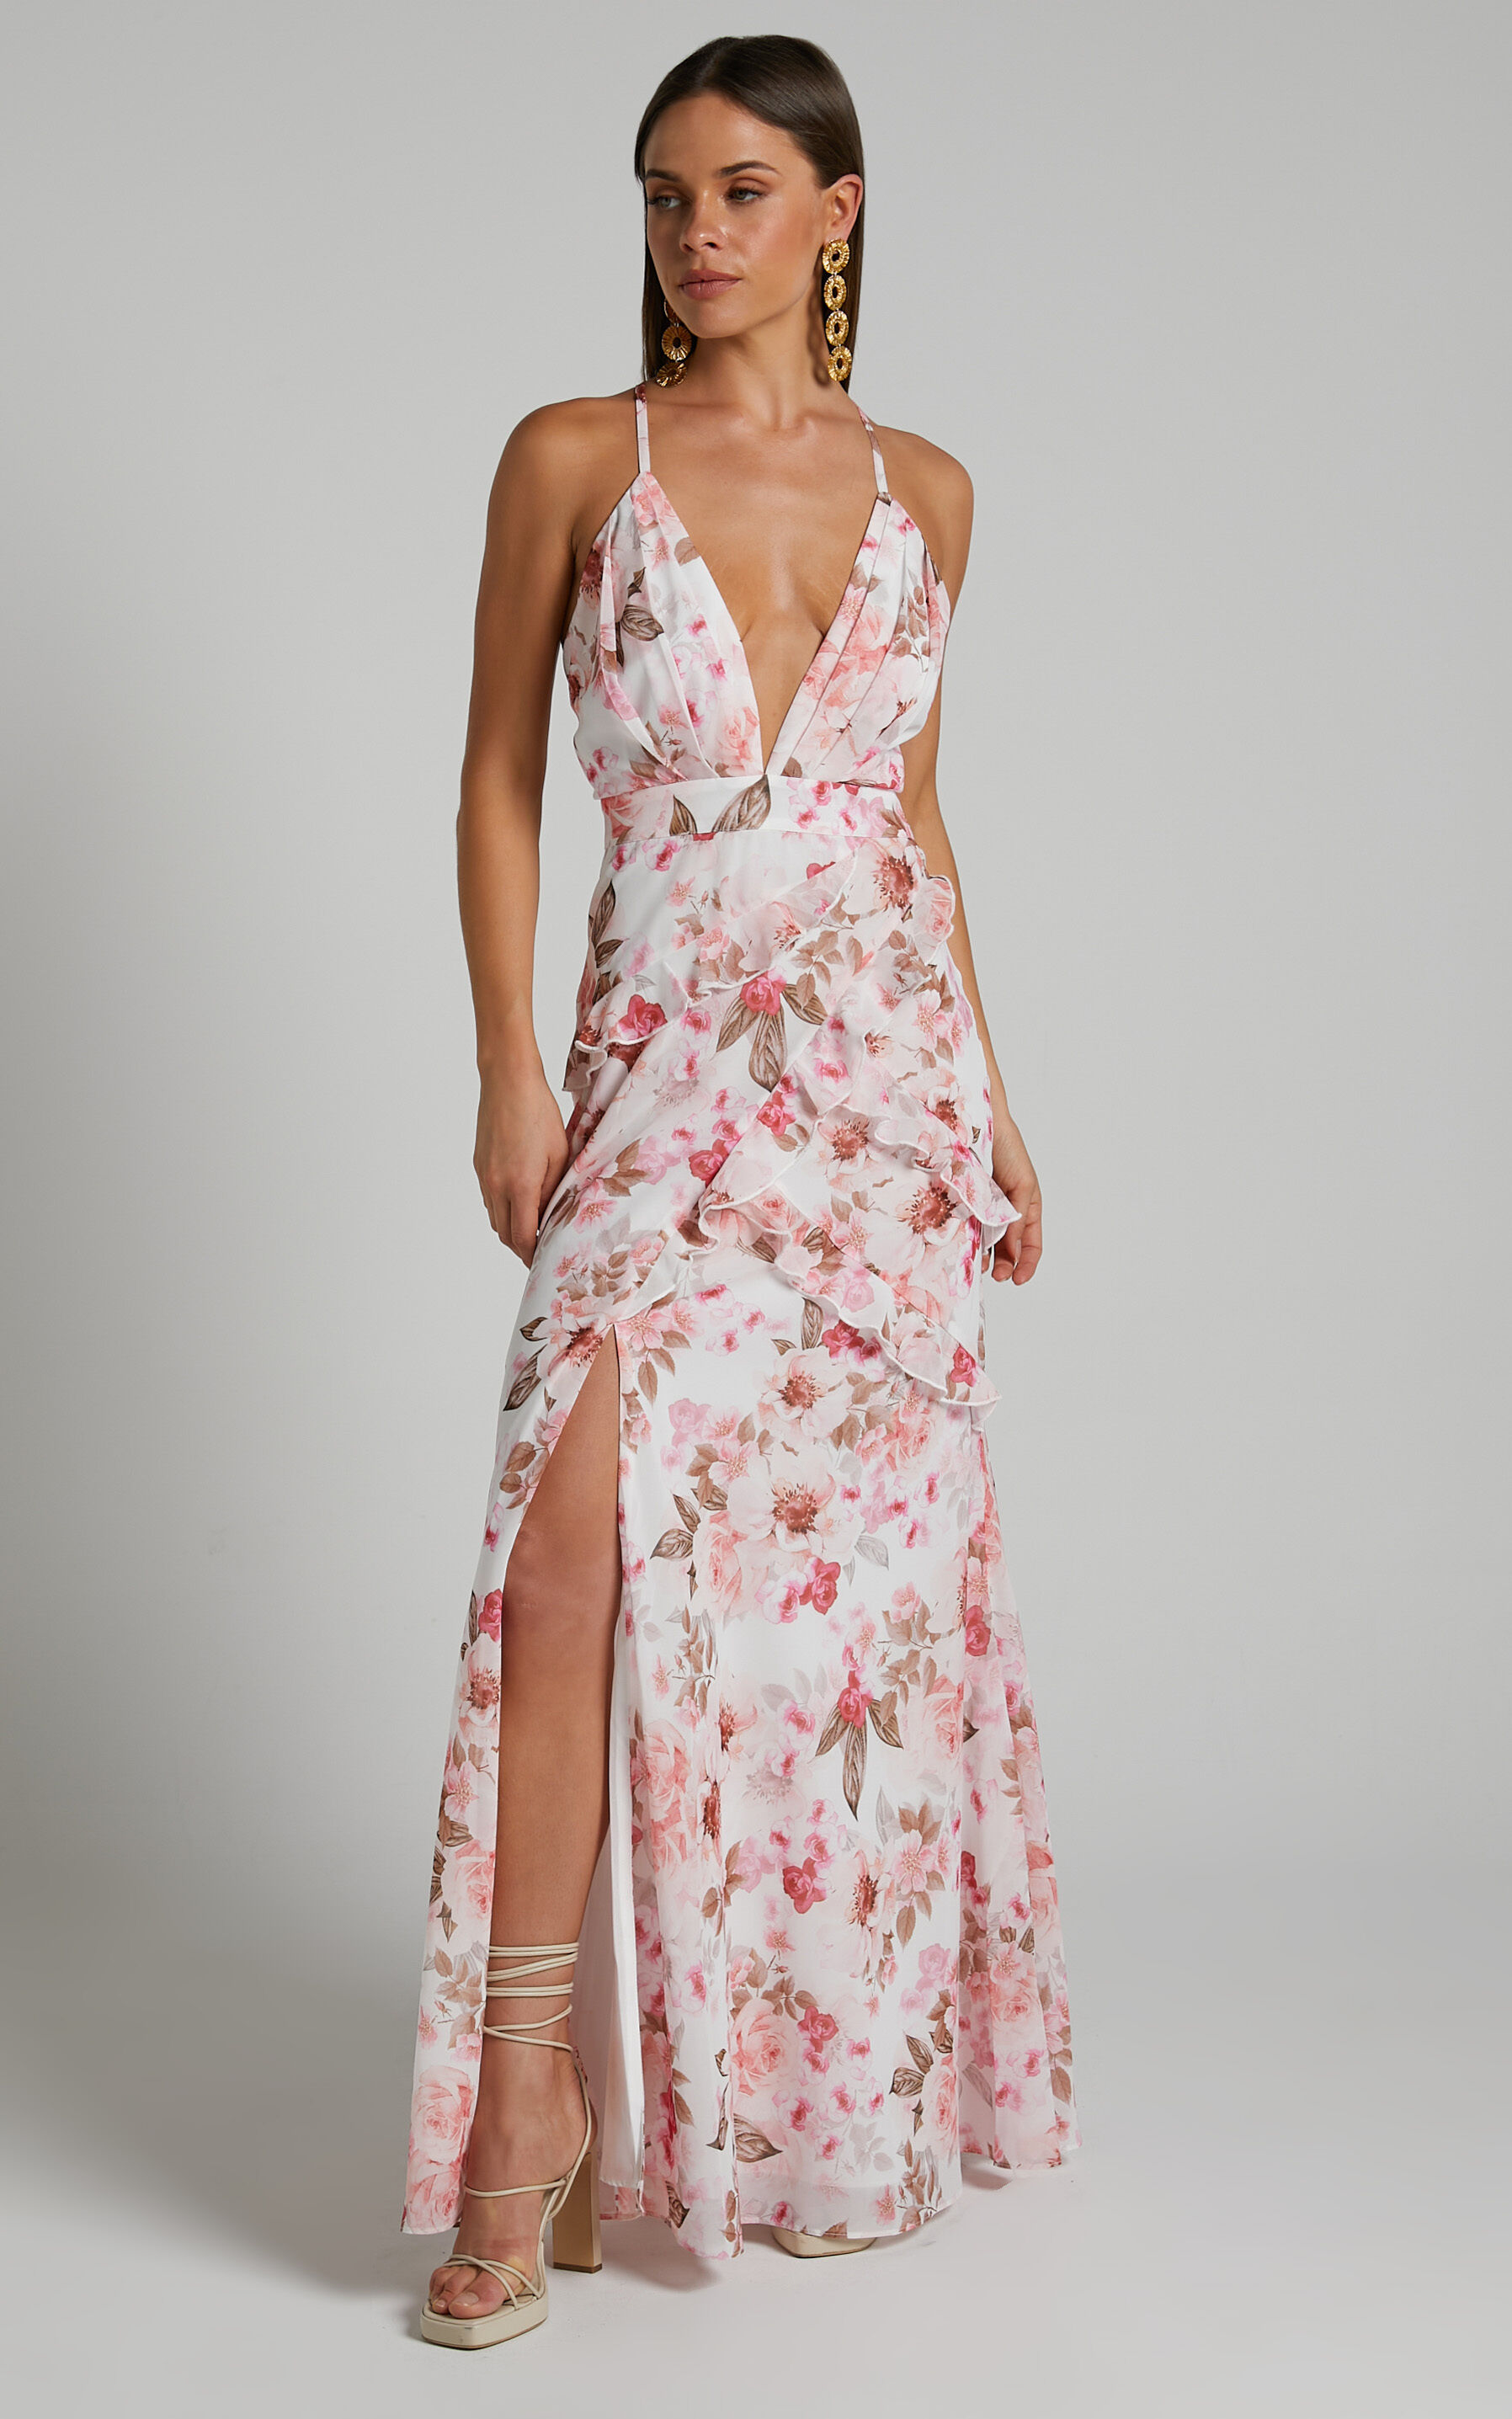 Suanie Ruffle Detail Tiered Maxi Dress in Bouquet Floral - 06, PNK1, super-hi-res image number null